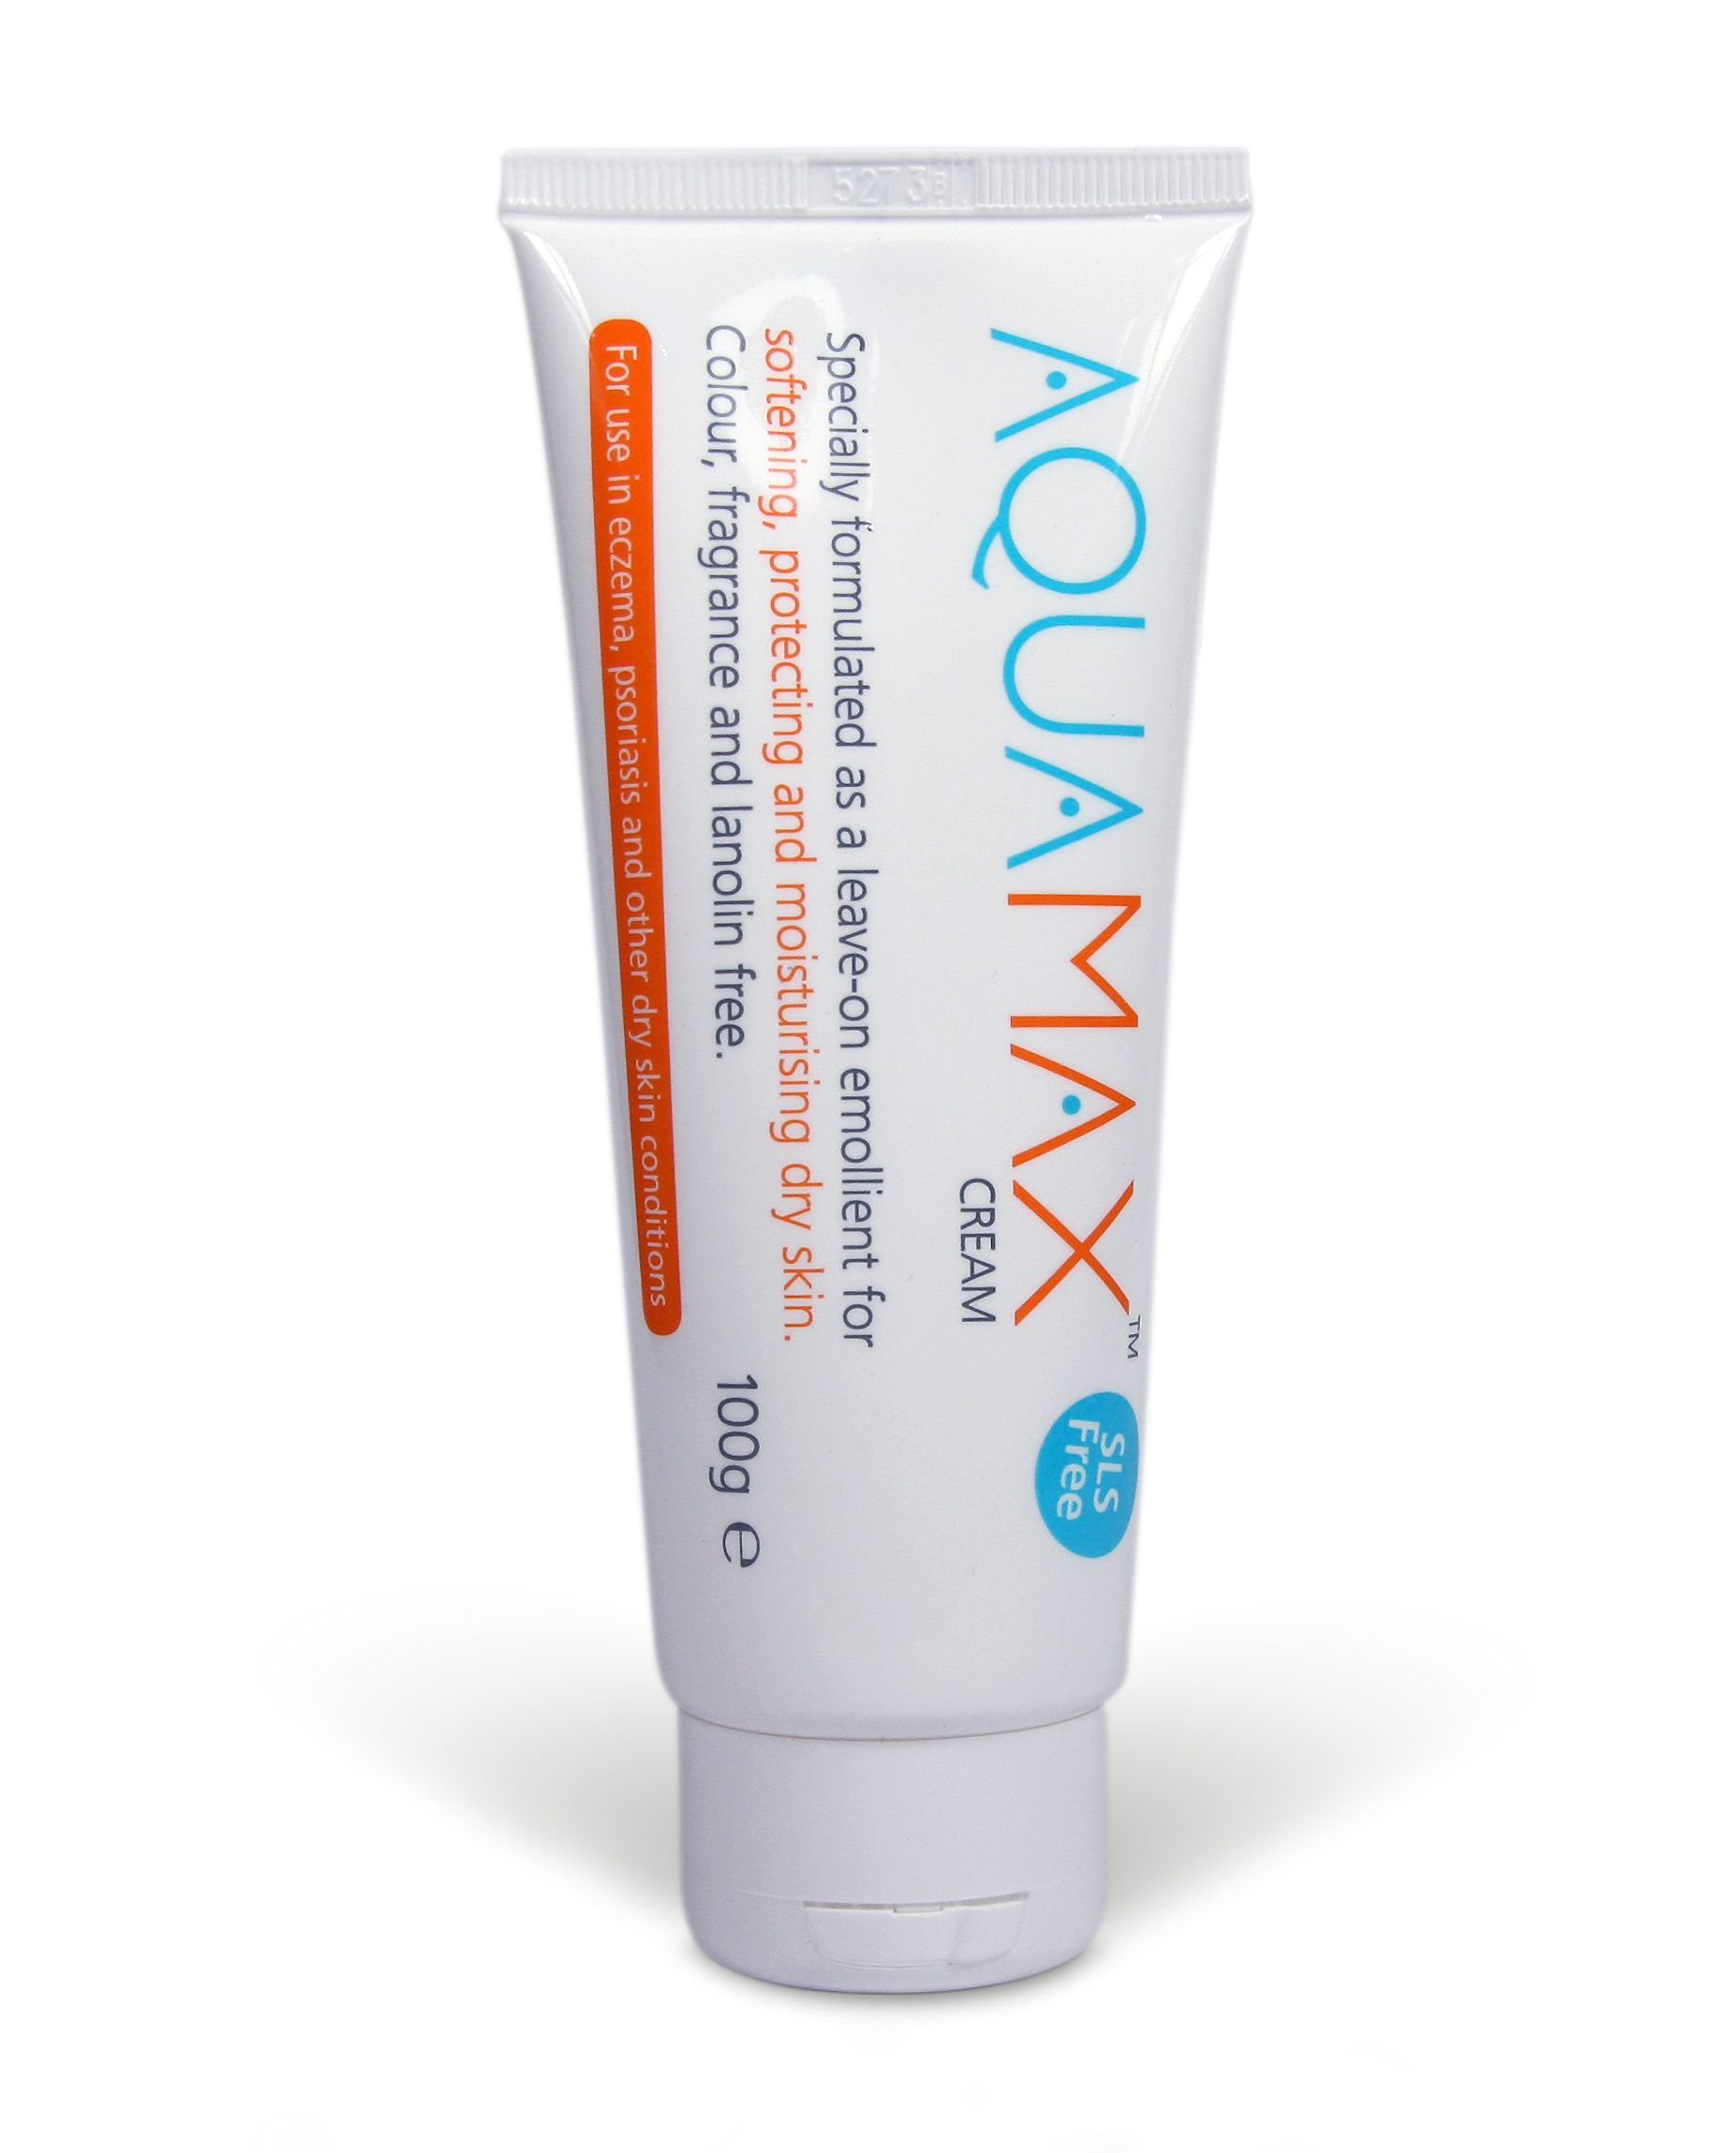 Aquamax emollient range, specially formulated to help ...